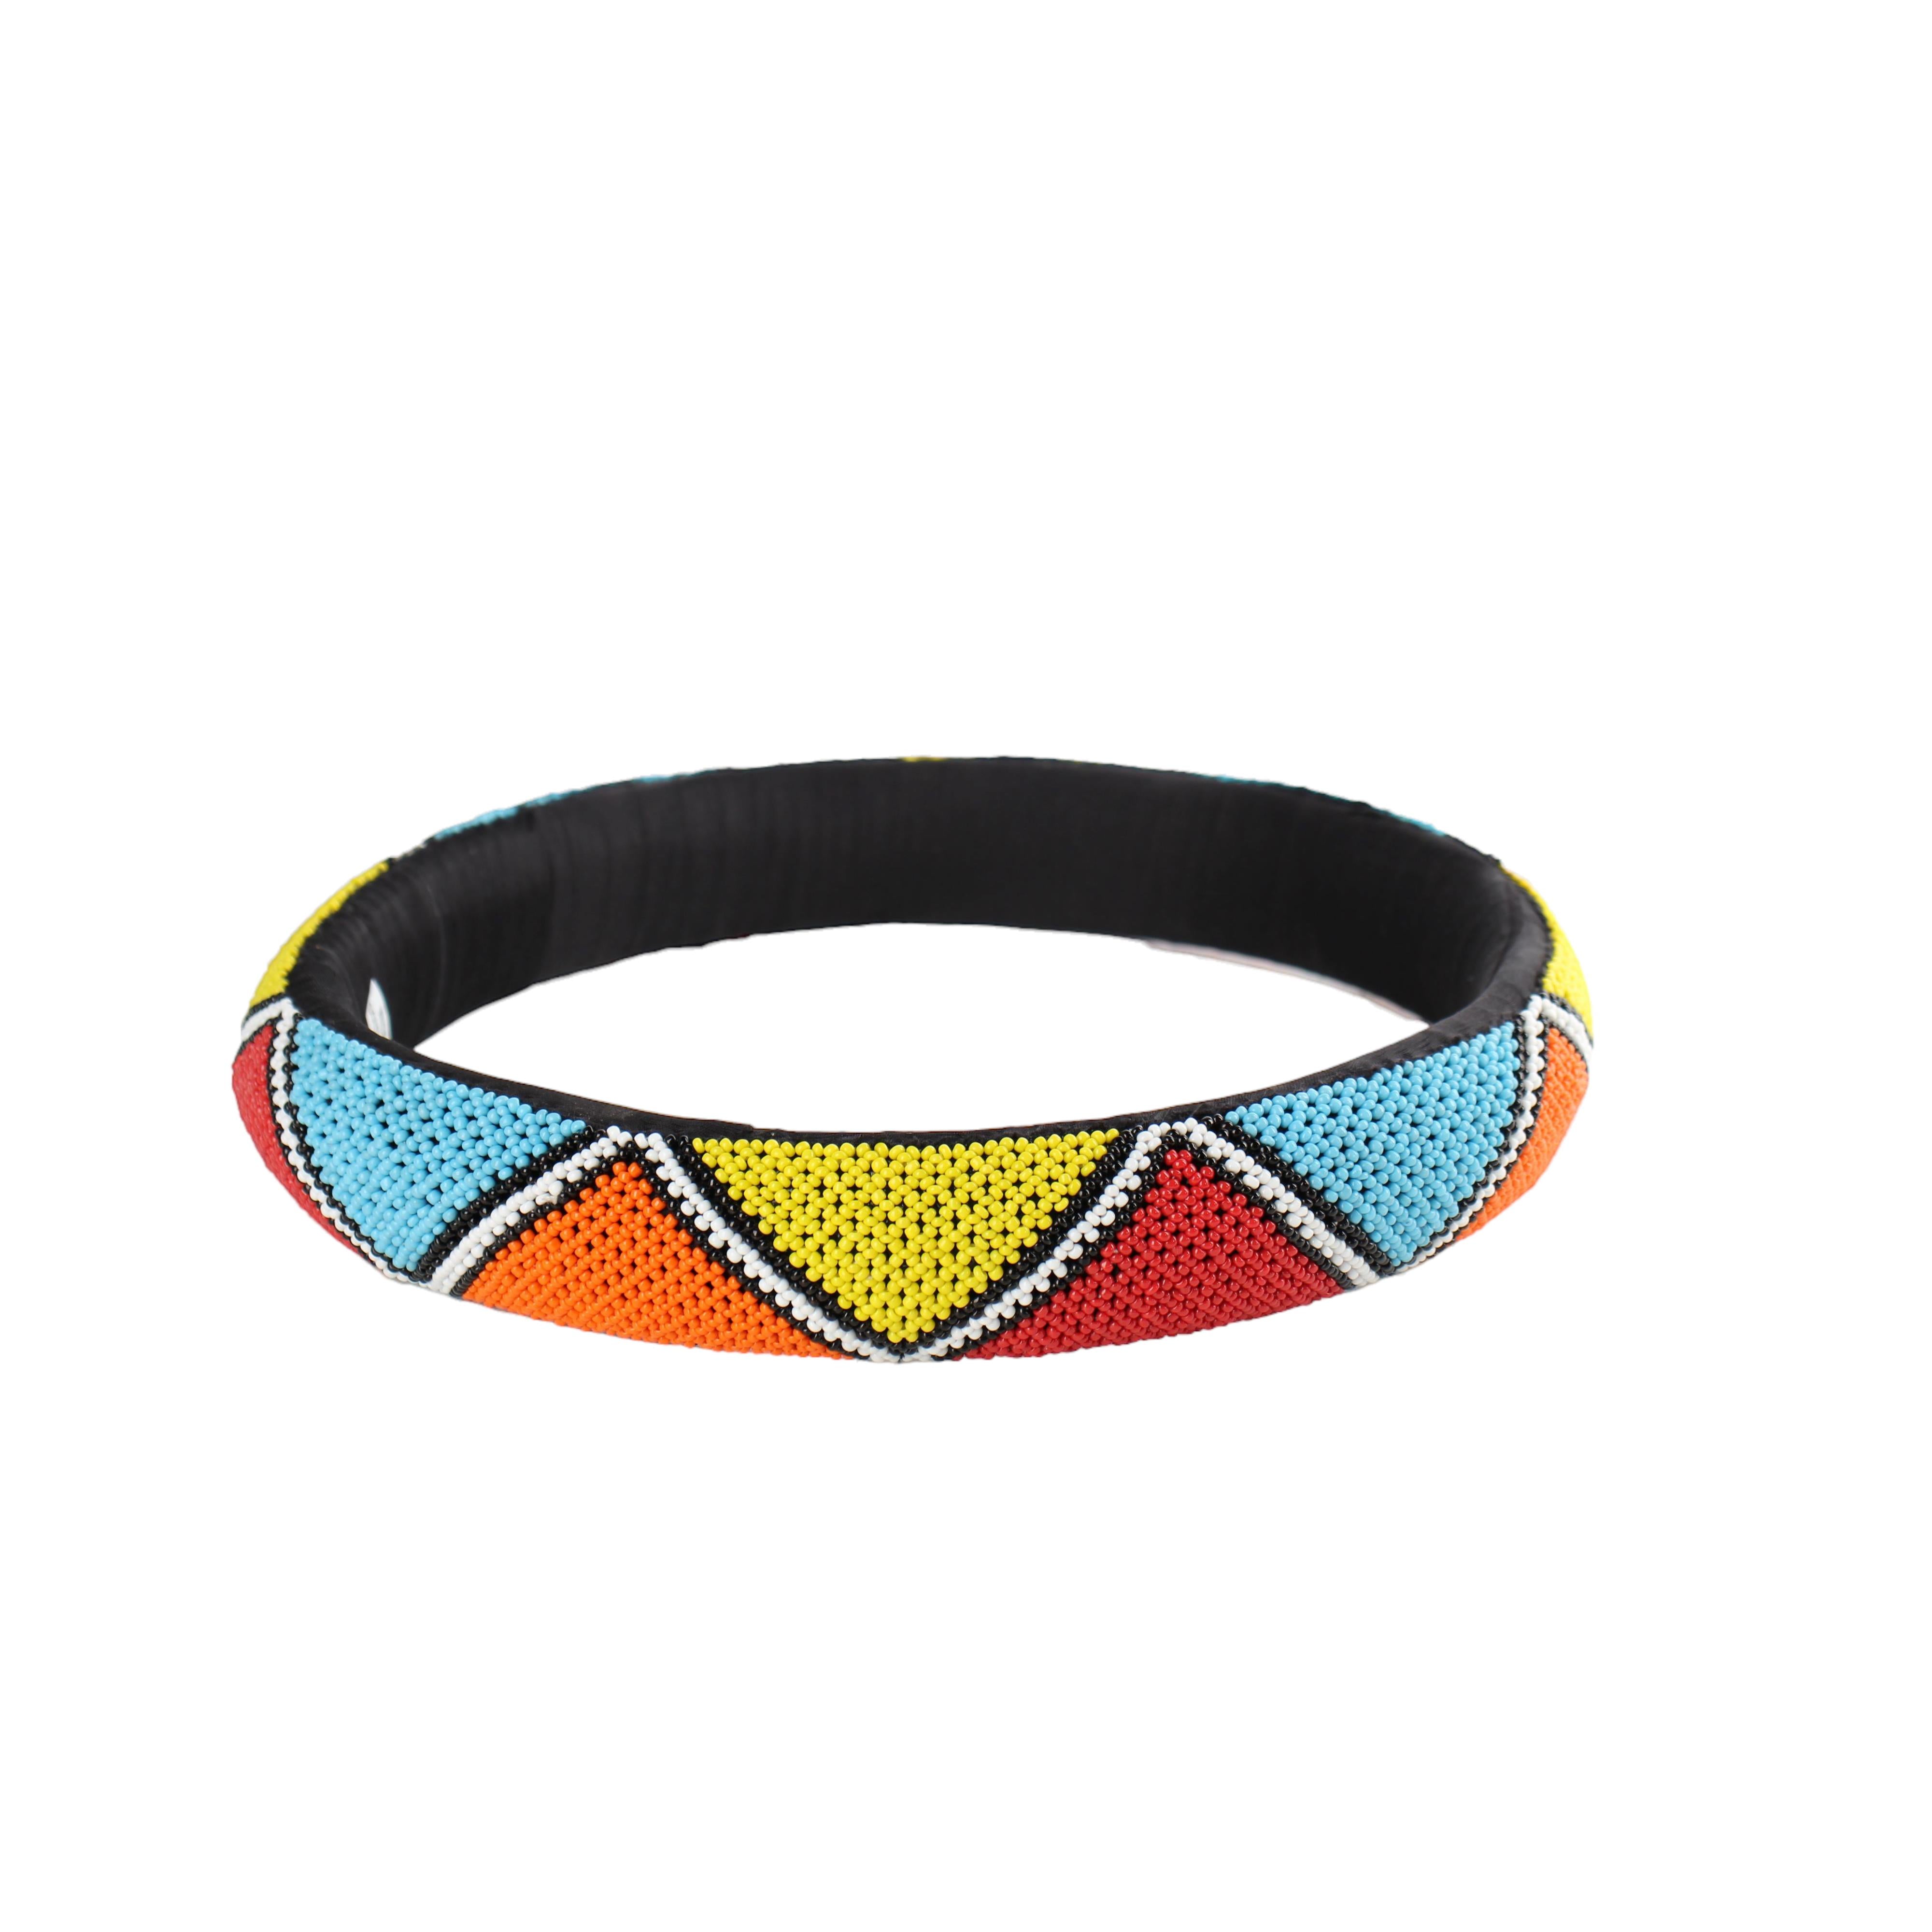 Ndebele Tribe Neck rings ~2.0" Tall - Neck rings